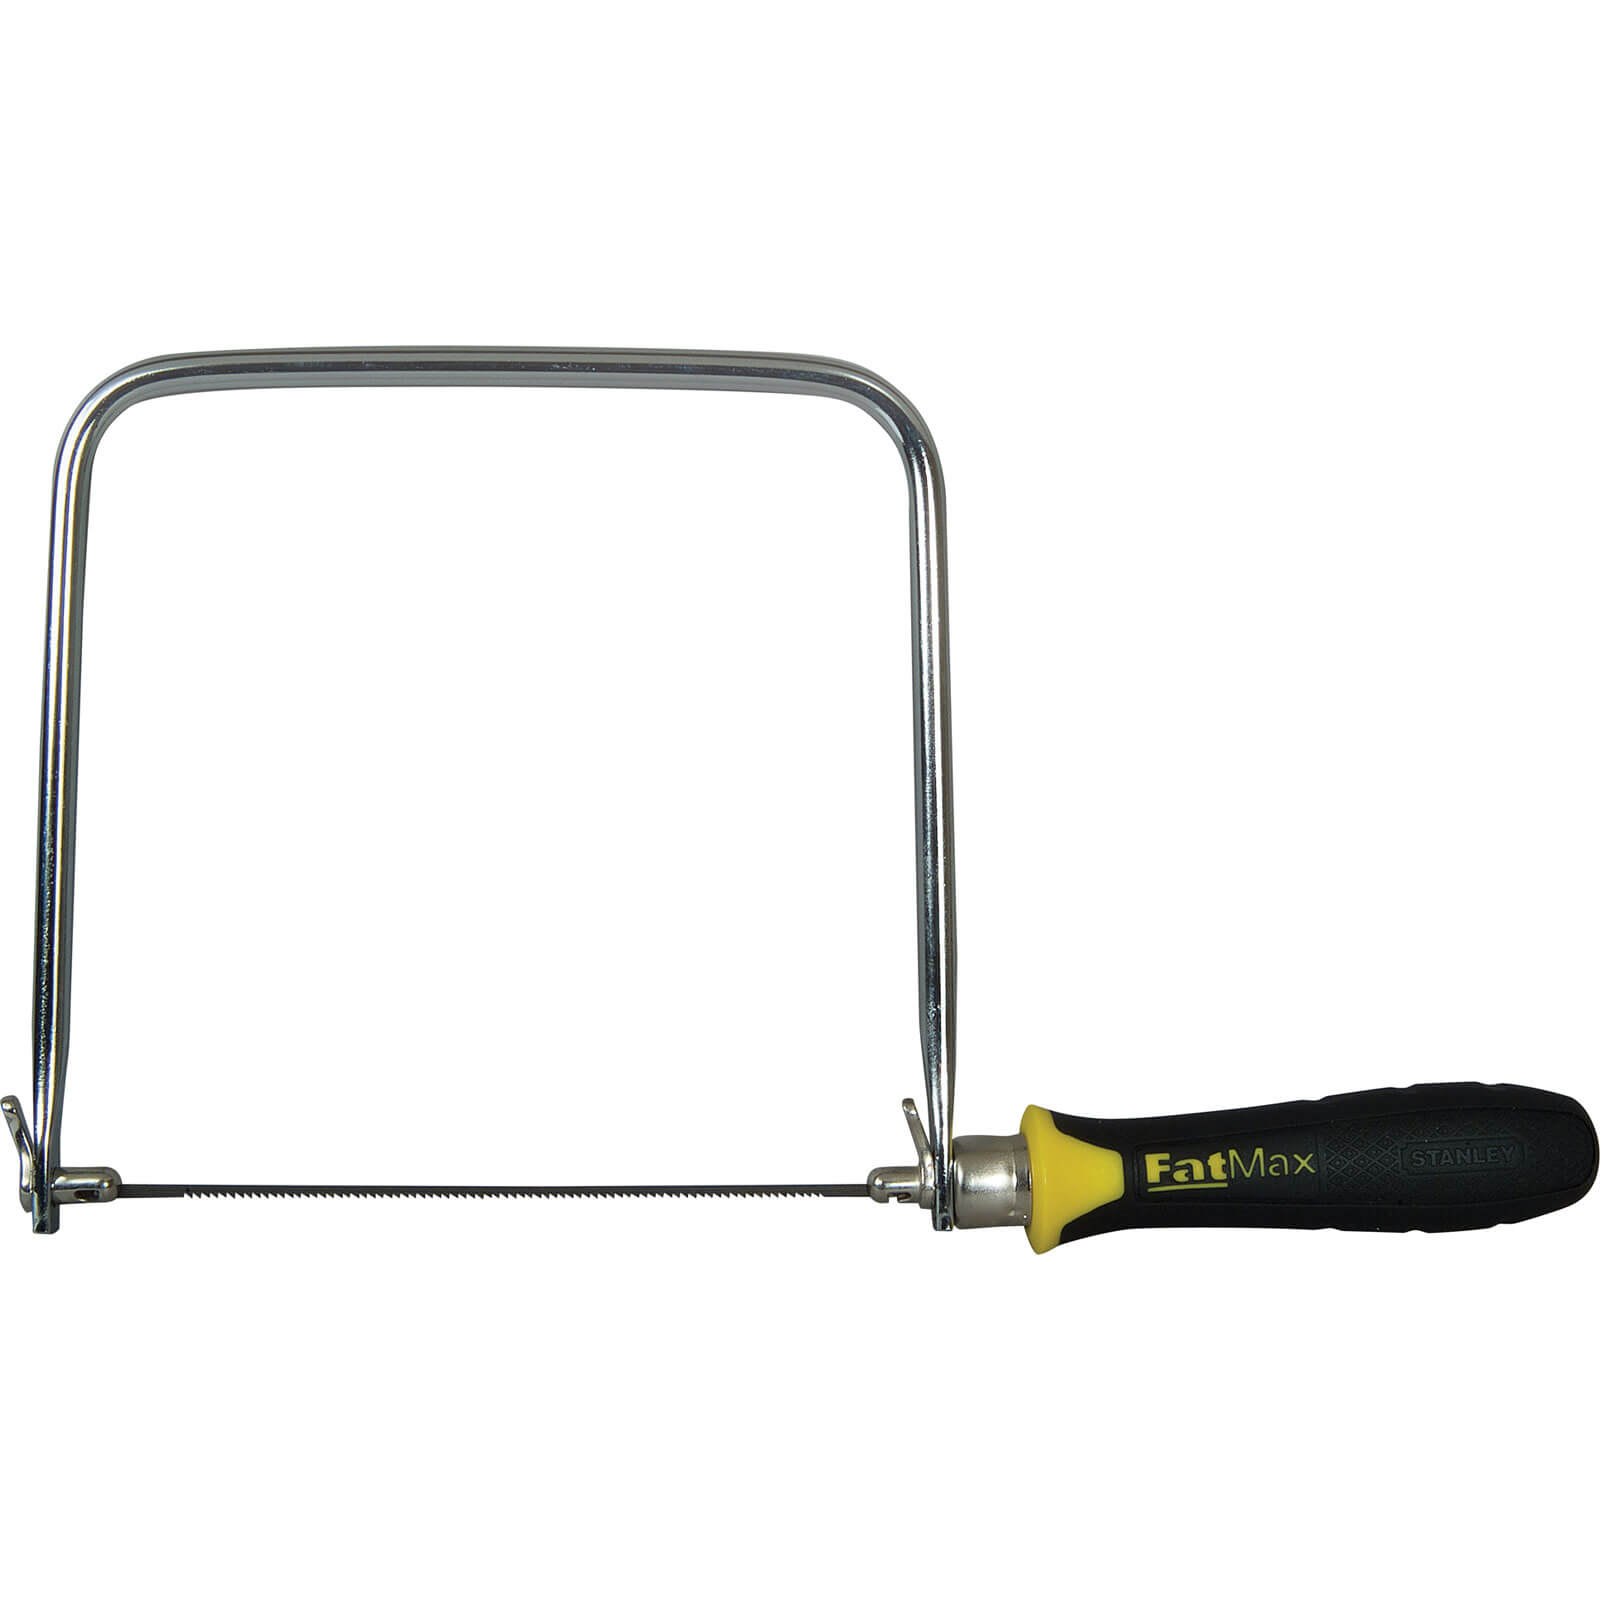 Image of Stanley Fatmax Coping Saw